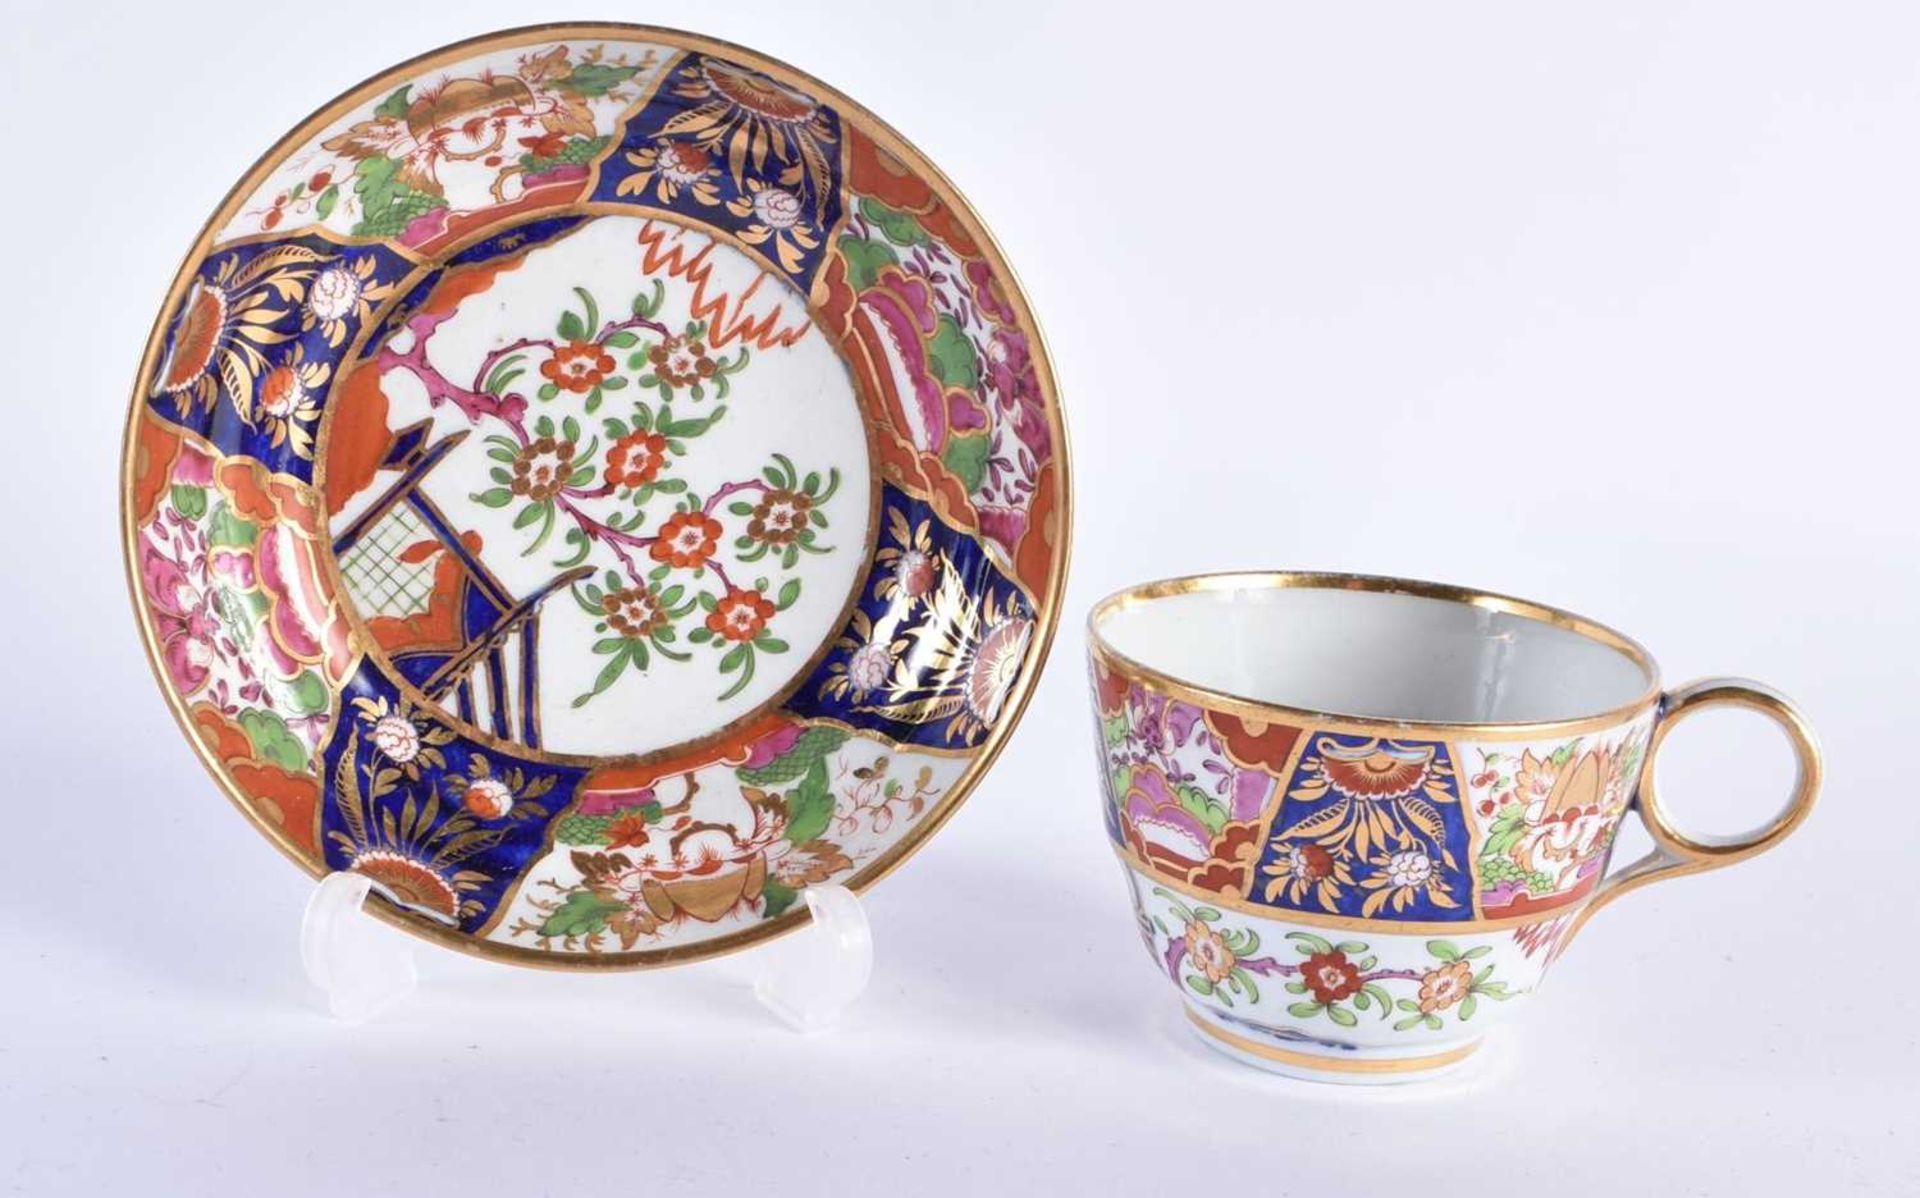 A COLLECTION OF 19TH CENTURY ENGLISH PORCELAIN CUPS AND SAUCERS in various forms and sizes. - Image 8 of 13